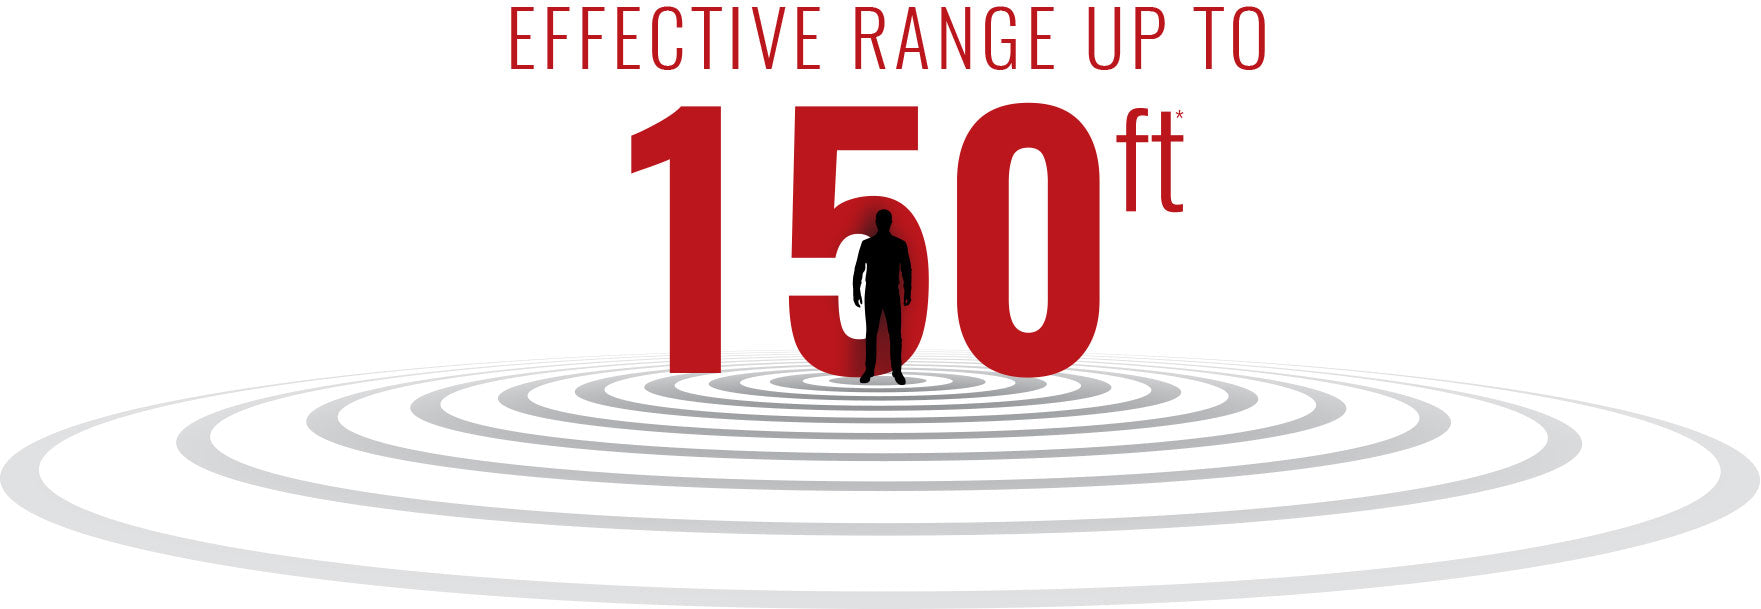 Effective Range Up To 150ft